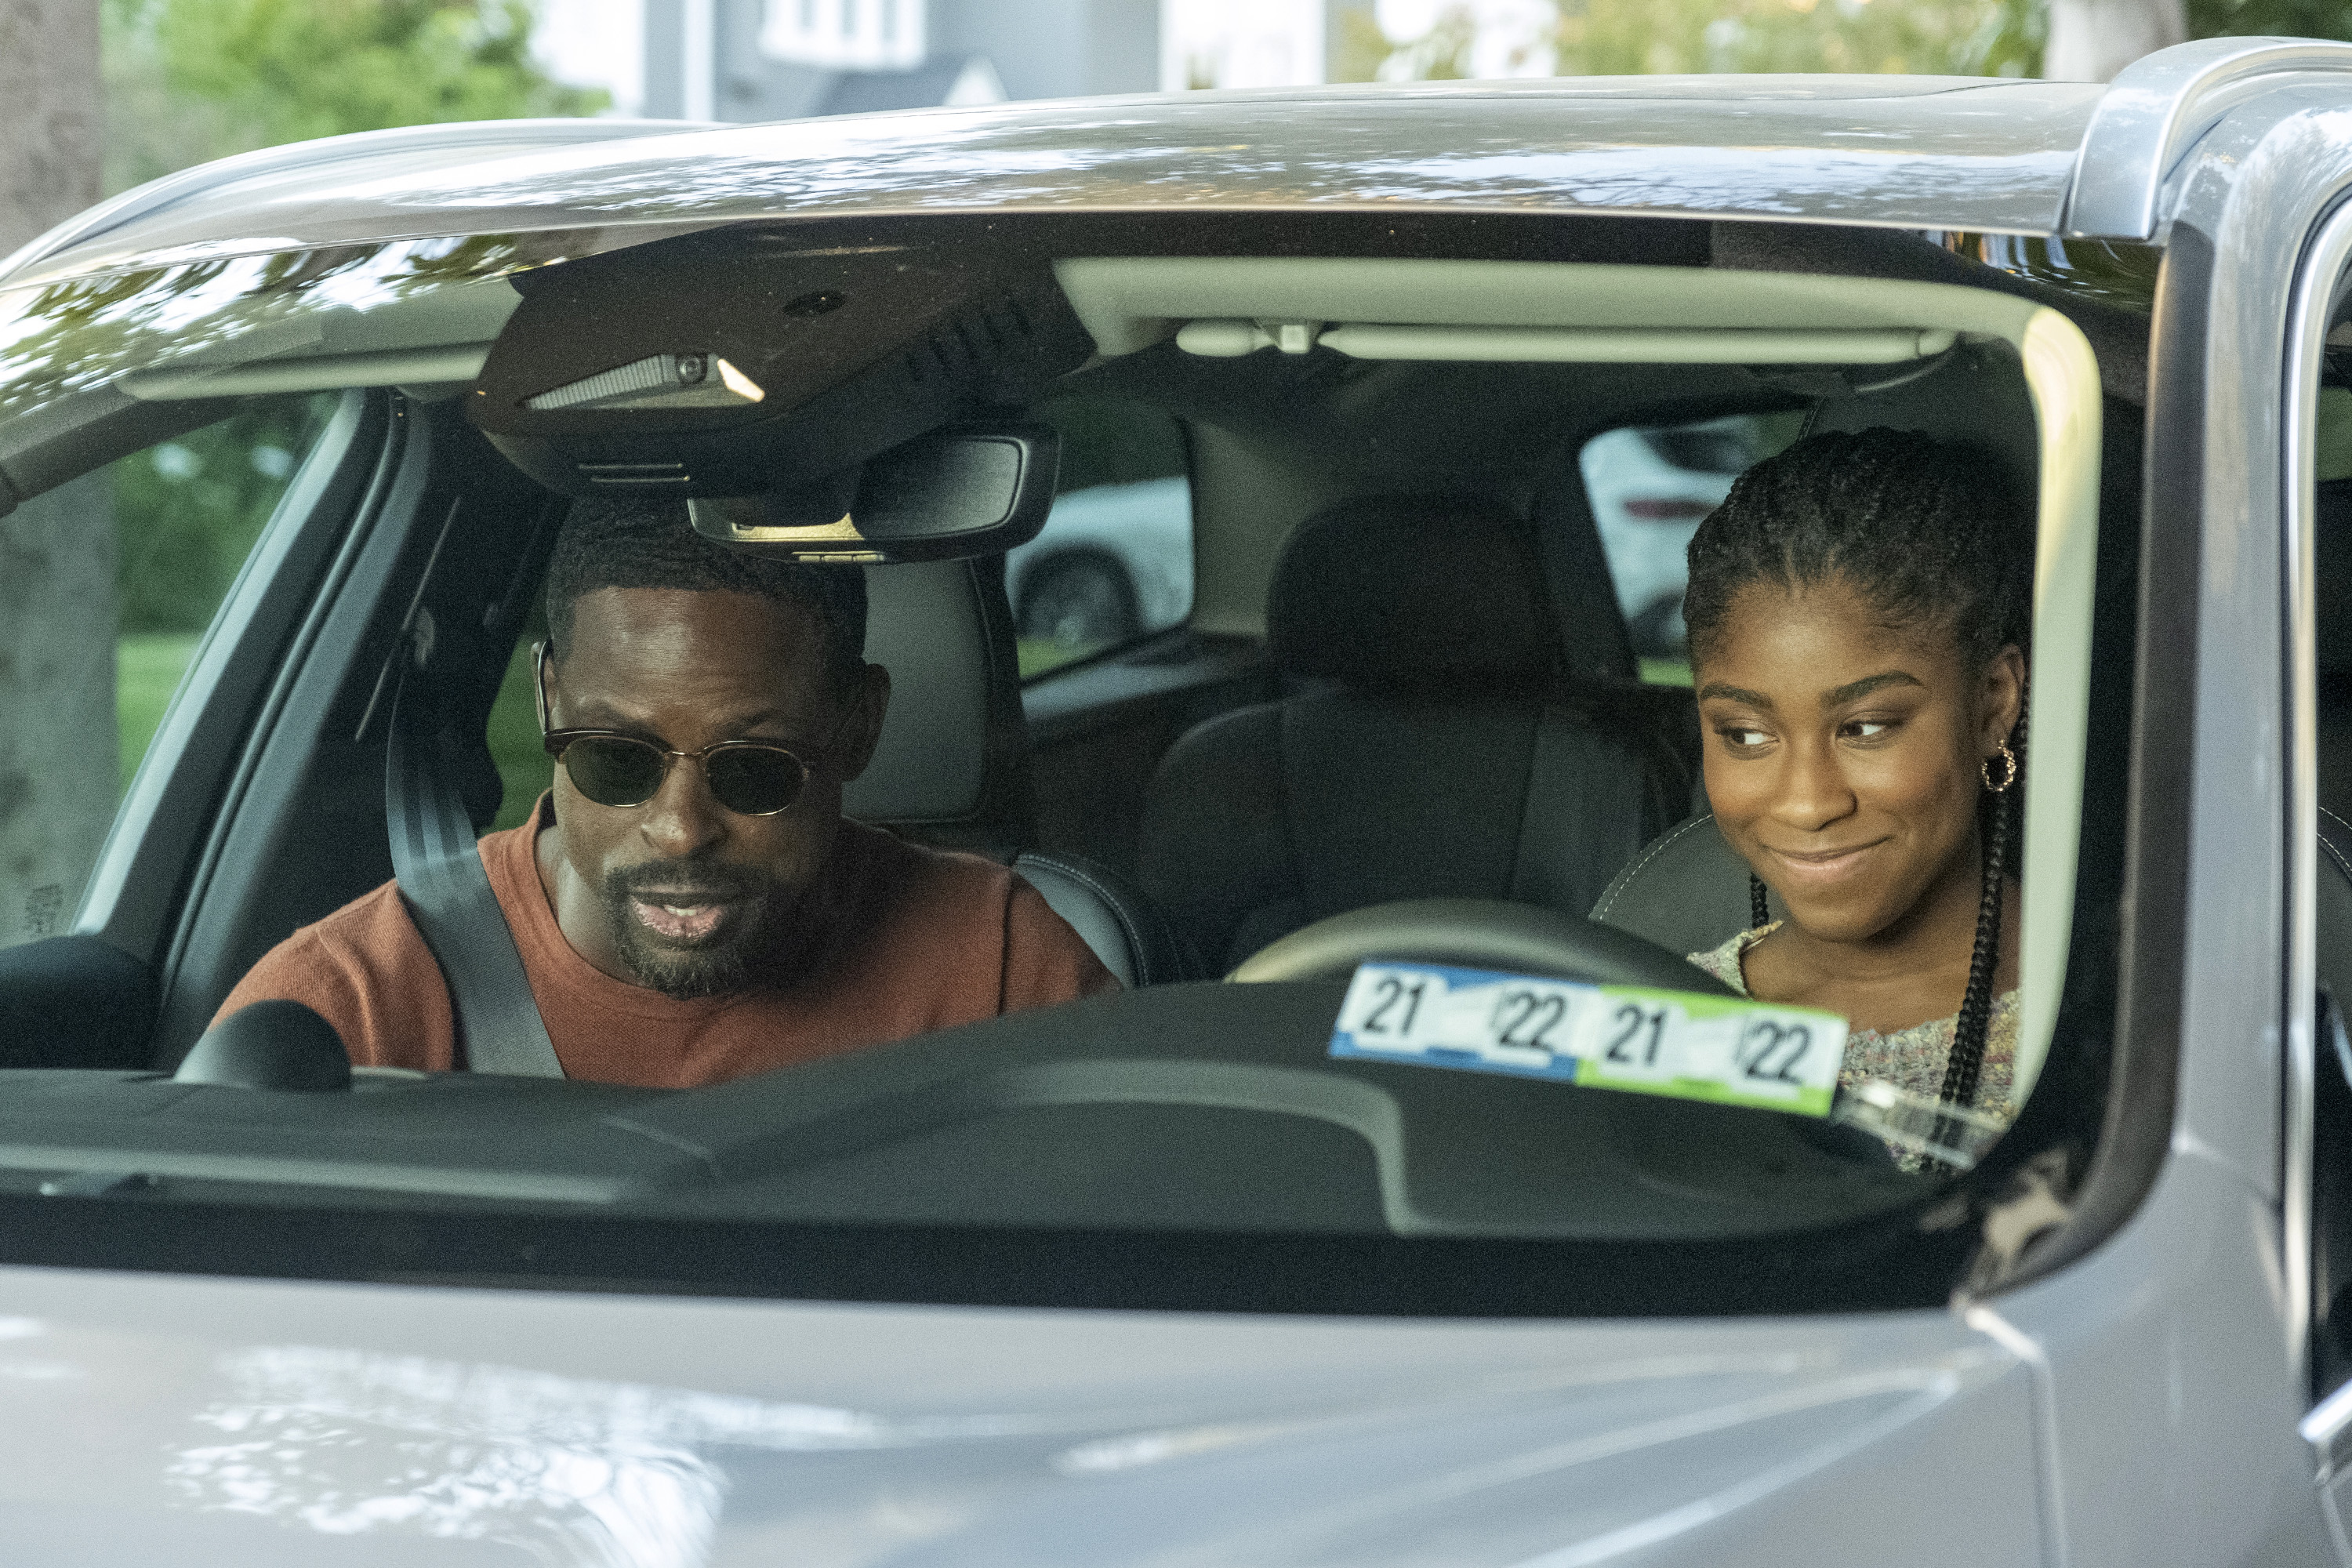 'This Is Us' Season 6 stars Sterling K. Brown and Lyric Ross, in character as Randall and Deja, sit in a car. Randall, in the passenger seat, wears a red sweater and sunglasses. Deja, in the driver seat, wears a multicolored sweater.